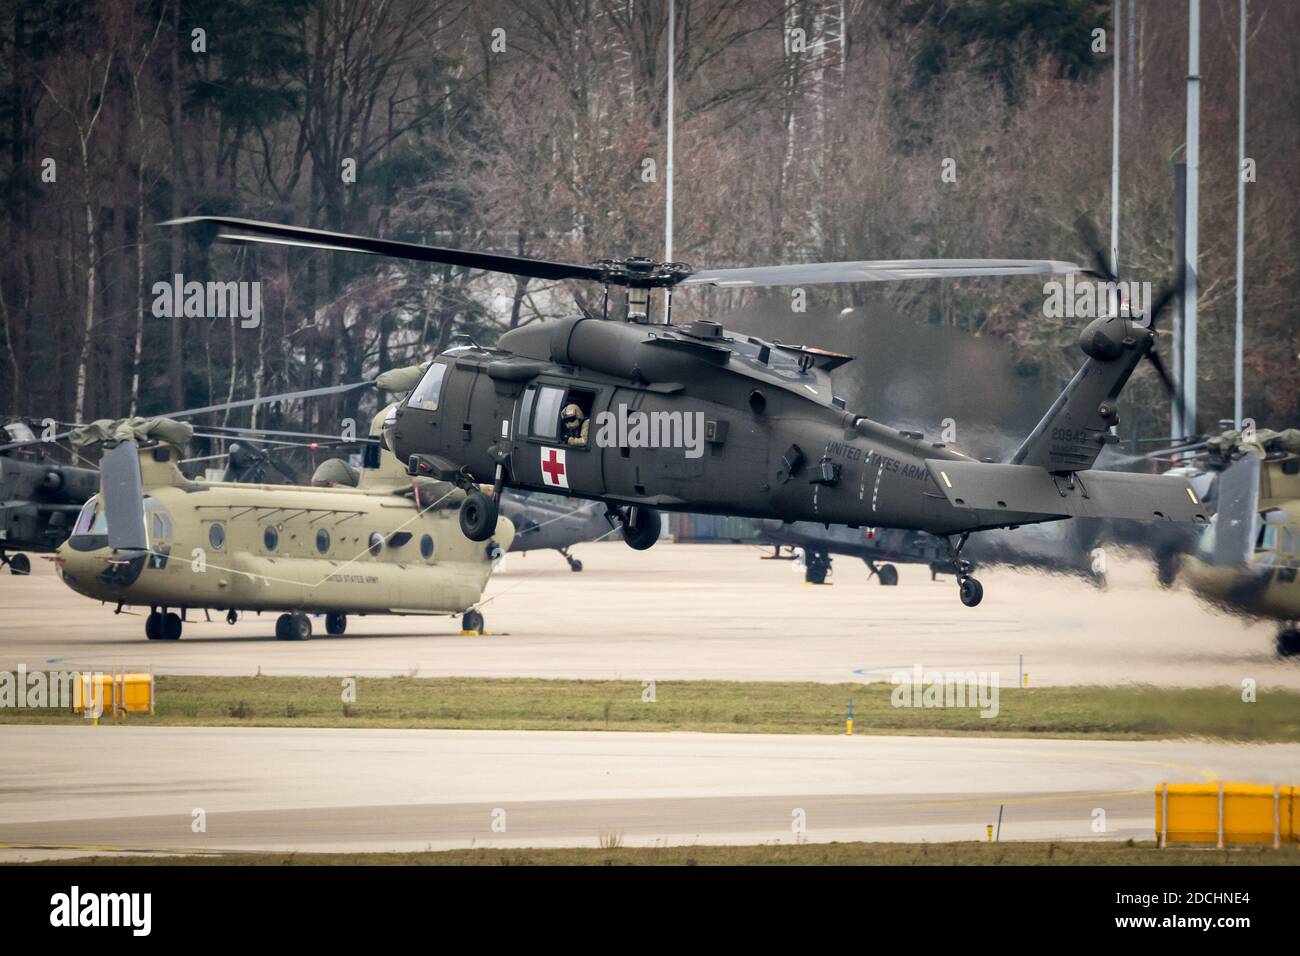 United States Army Sikorsky HH-60M Blackhawk transport helicopter in flight. The Netherlands - February 4, 2019 Stock Photo